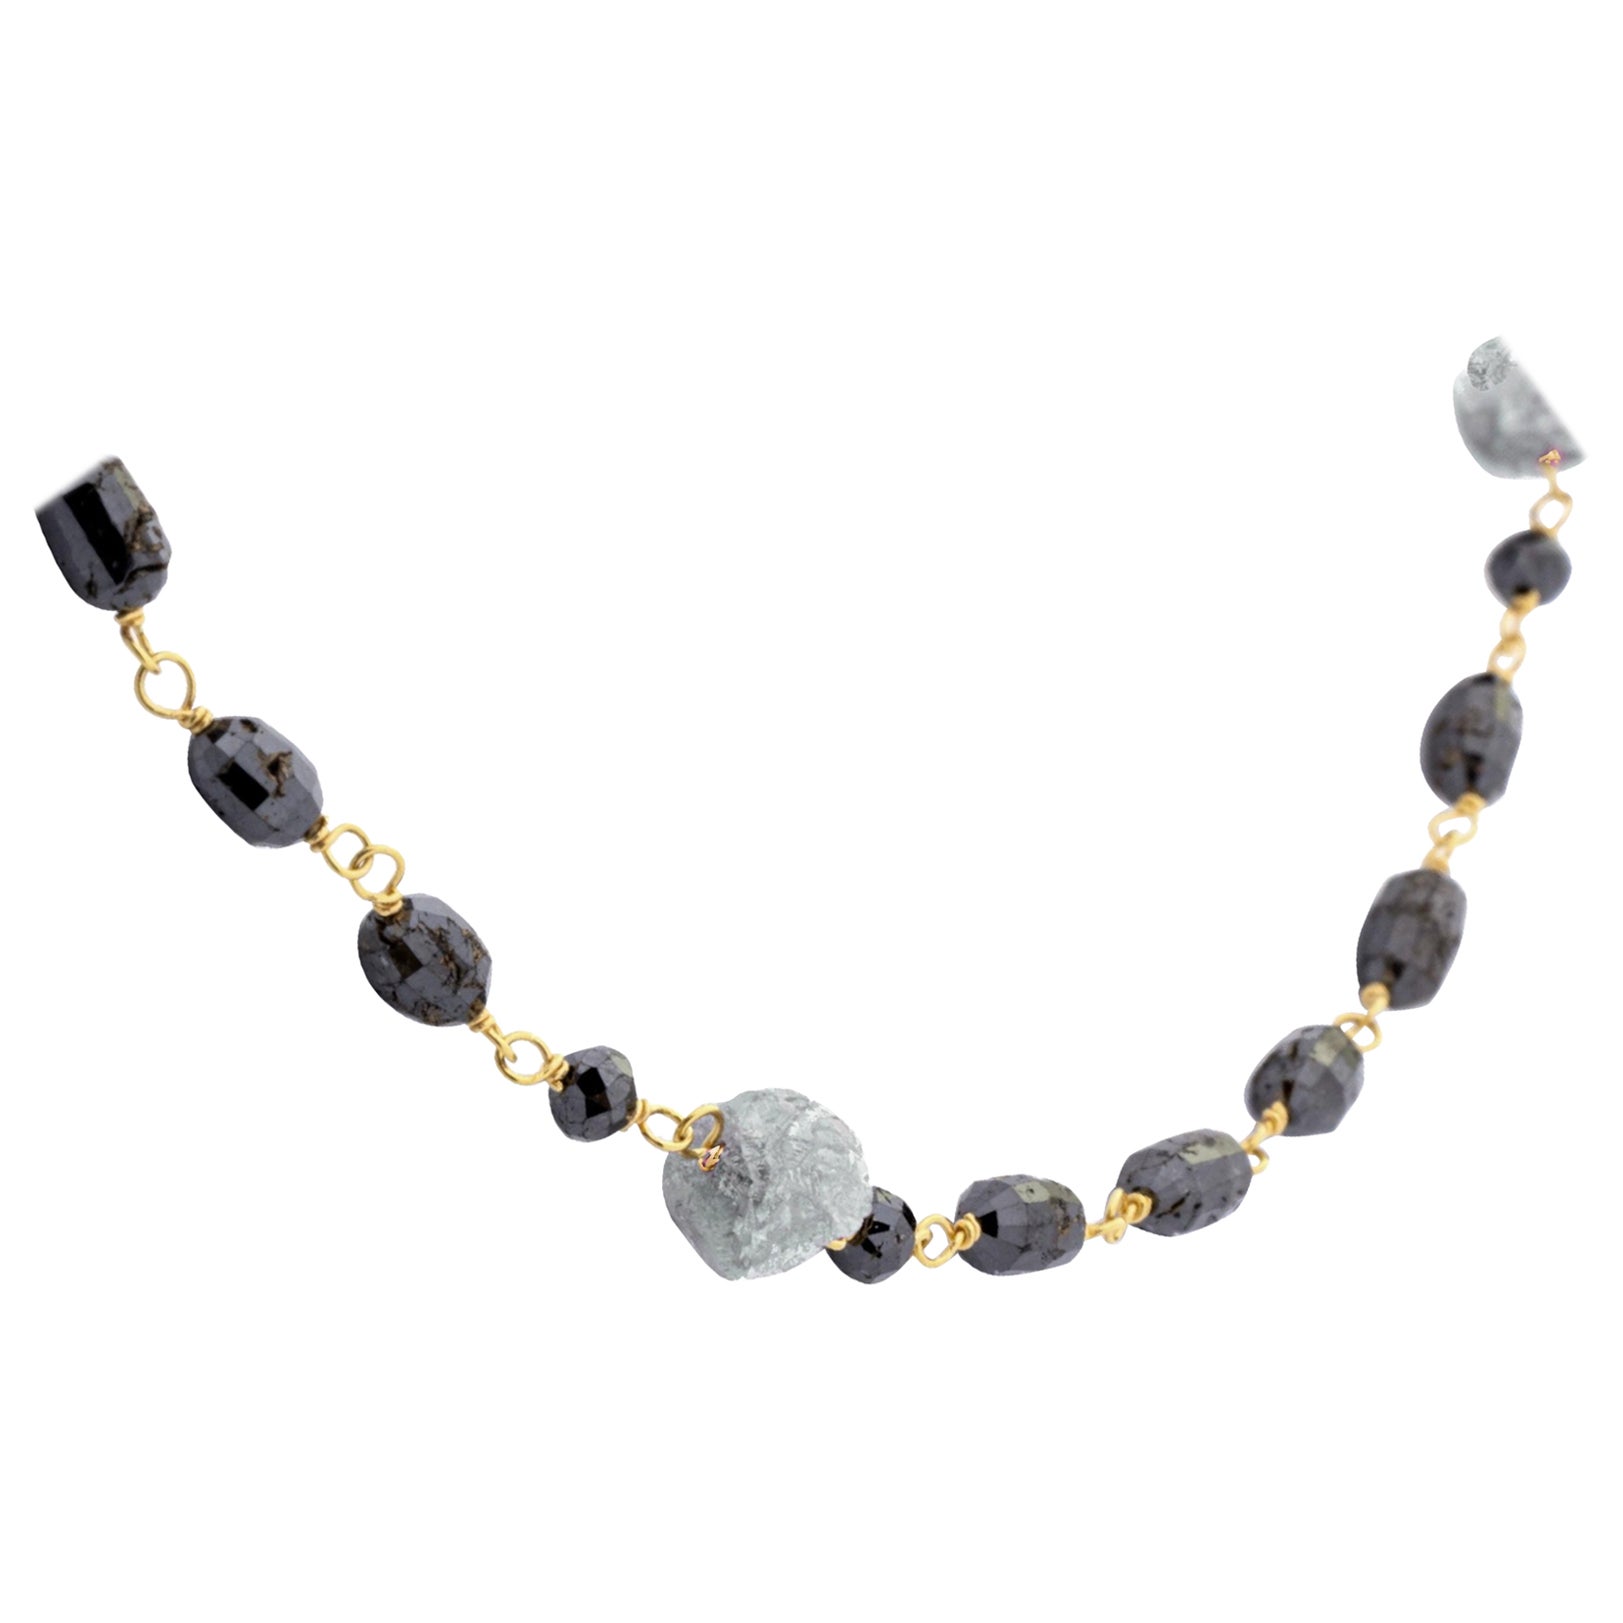 Black and Rough Ice Grey Diamond Necklace in 18 Karat White Gold